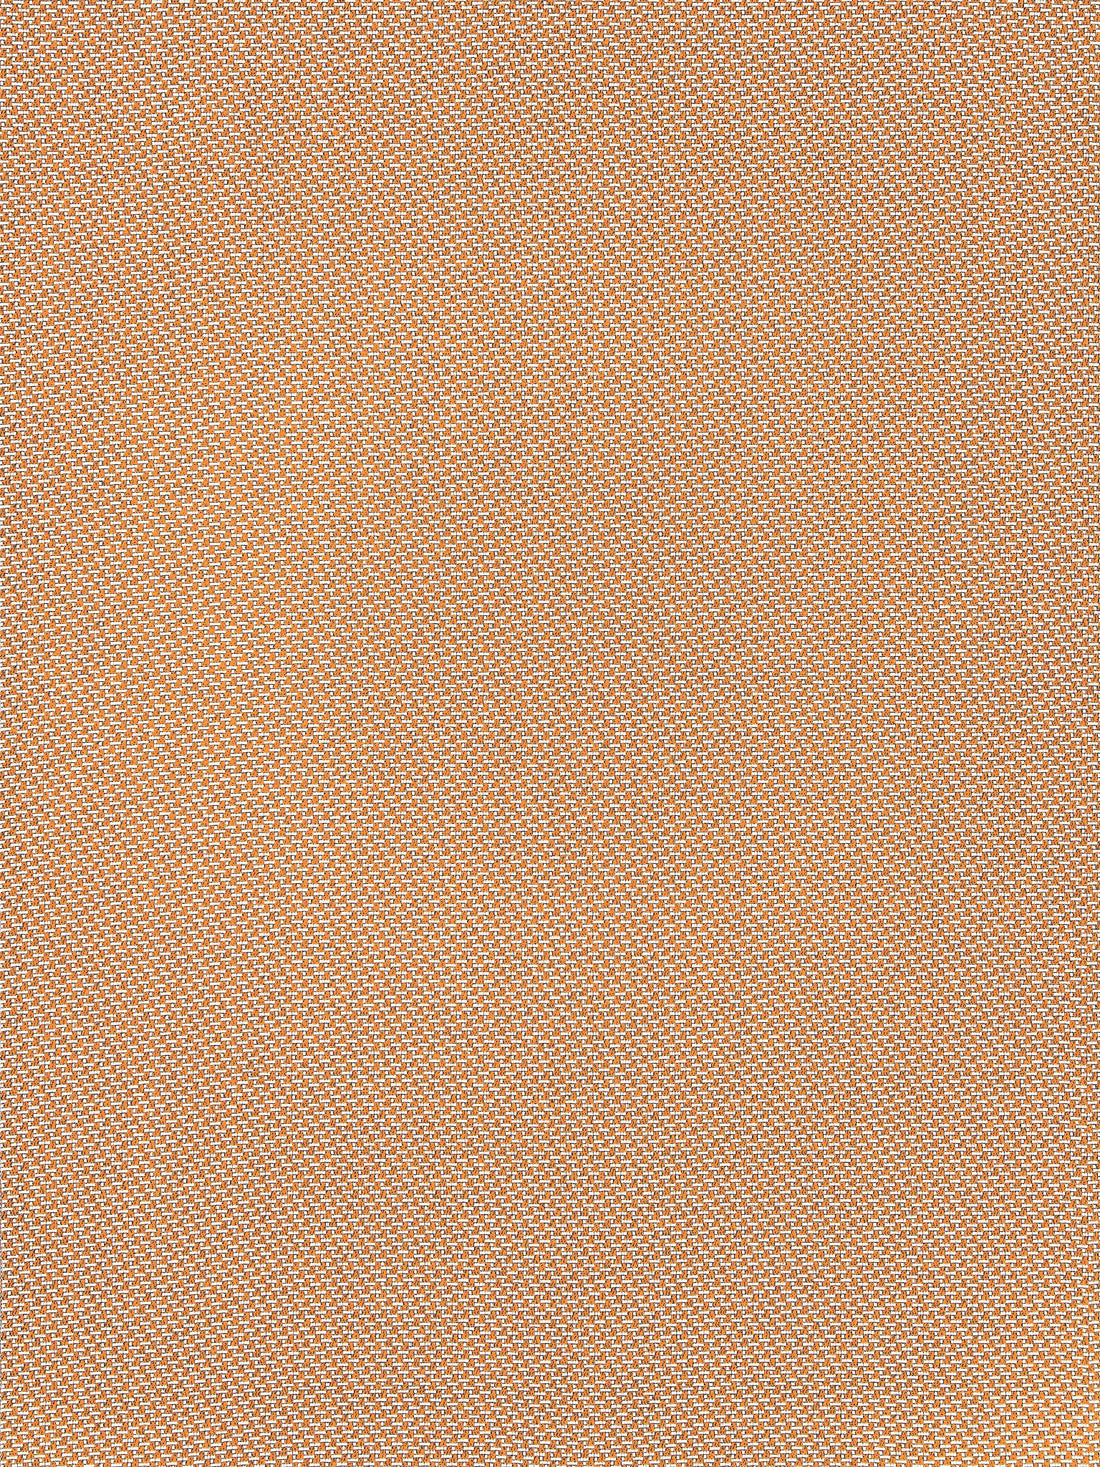 North Downs fabric in spiced peach color - pattern number EY 000213ND - by Scalamandre in the Old World Weavers collection